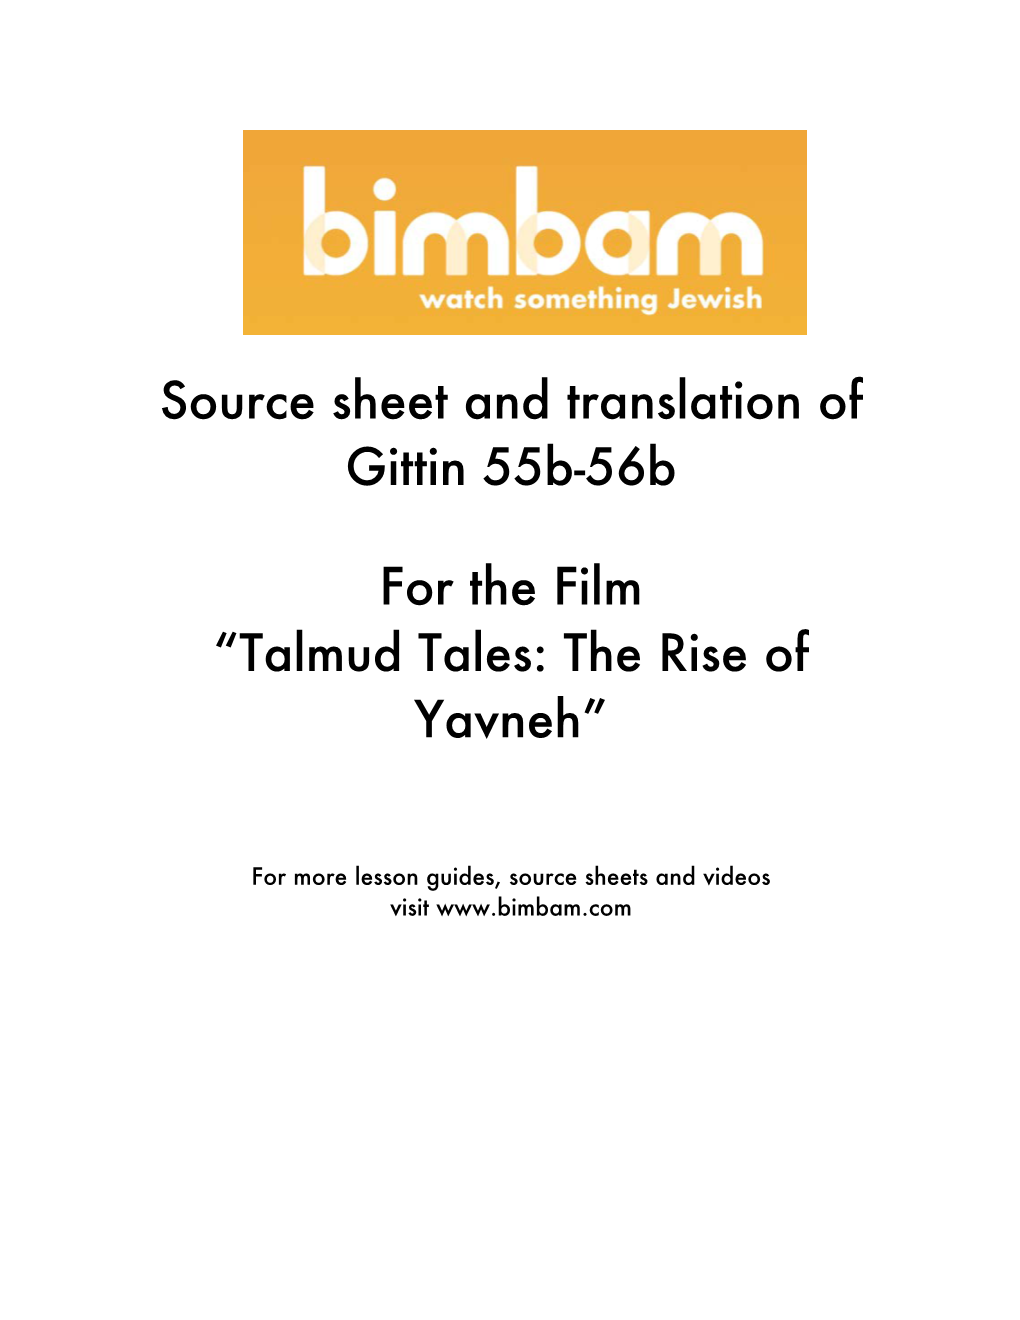 Source Sheet and Translation of Gittin 55B-56B for the Film “Talmud Tales: the Rise of Yavneh”